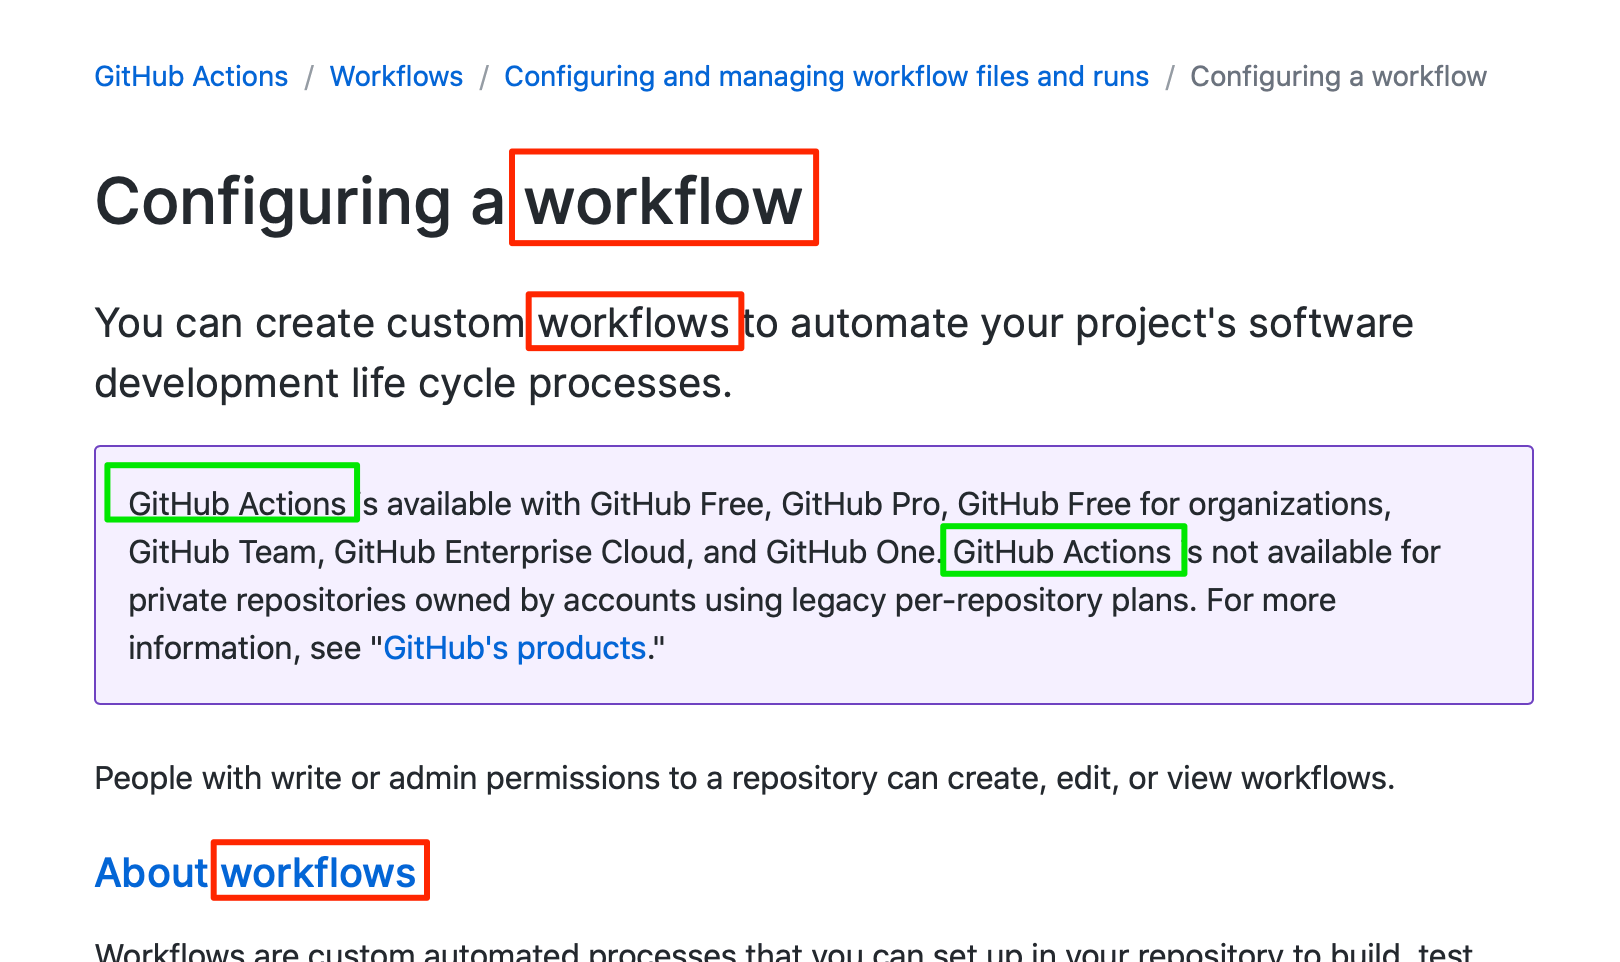 Both terms "action" and "workflow" are used.